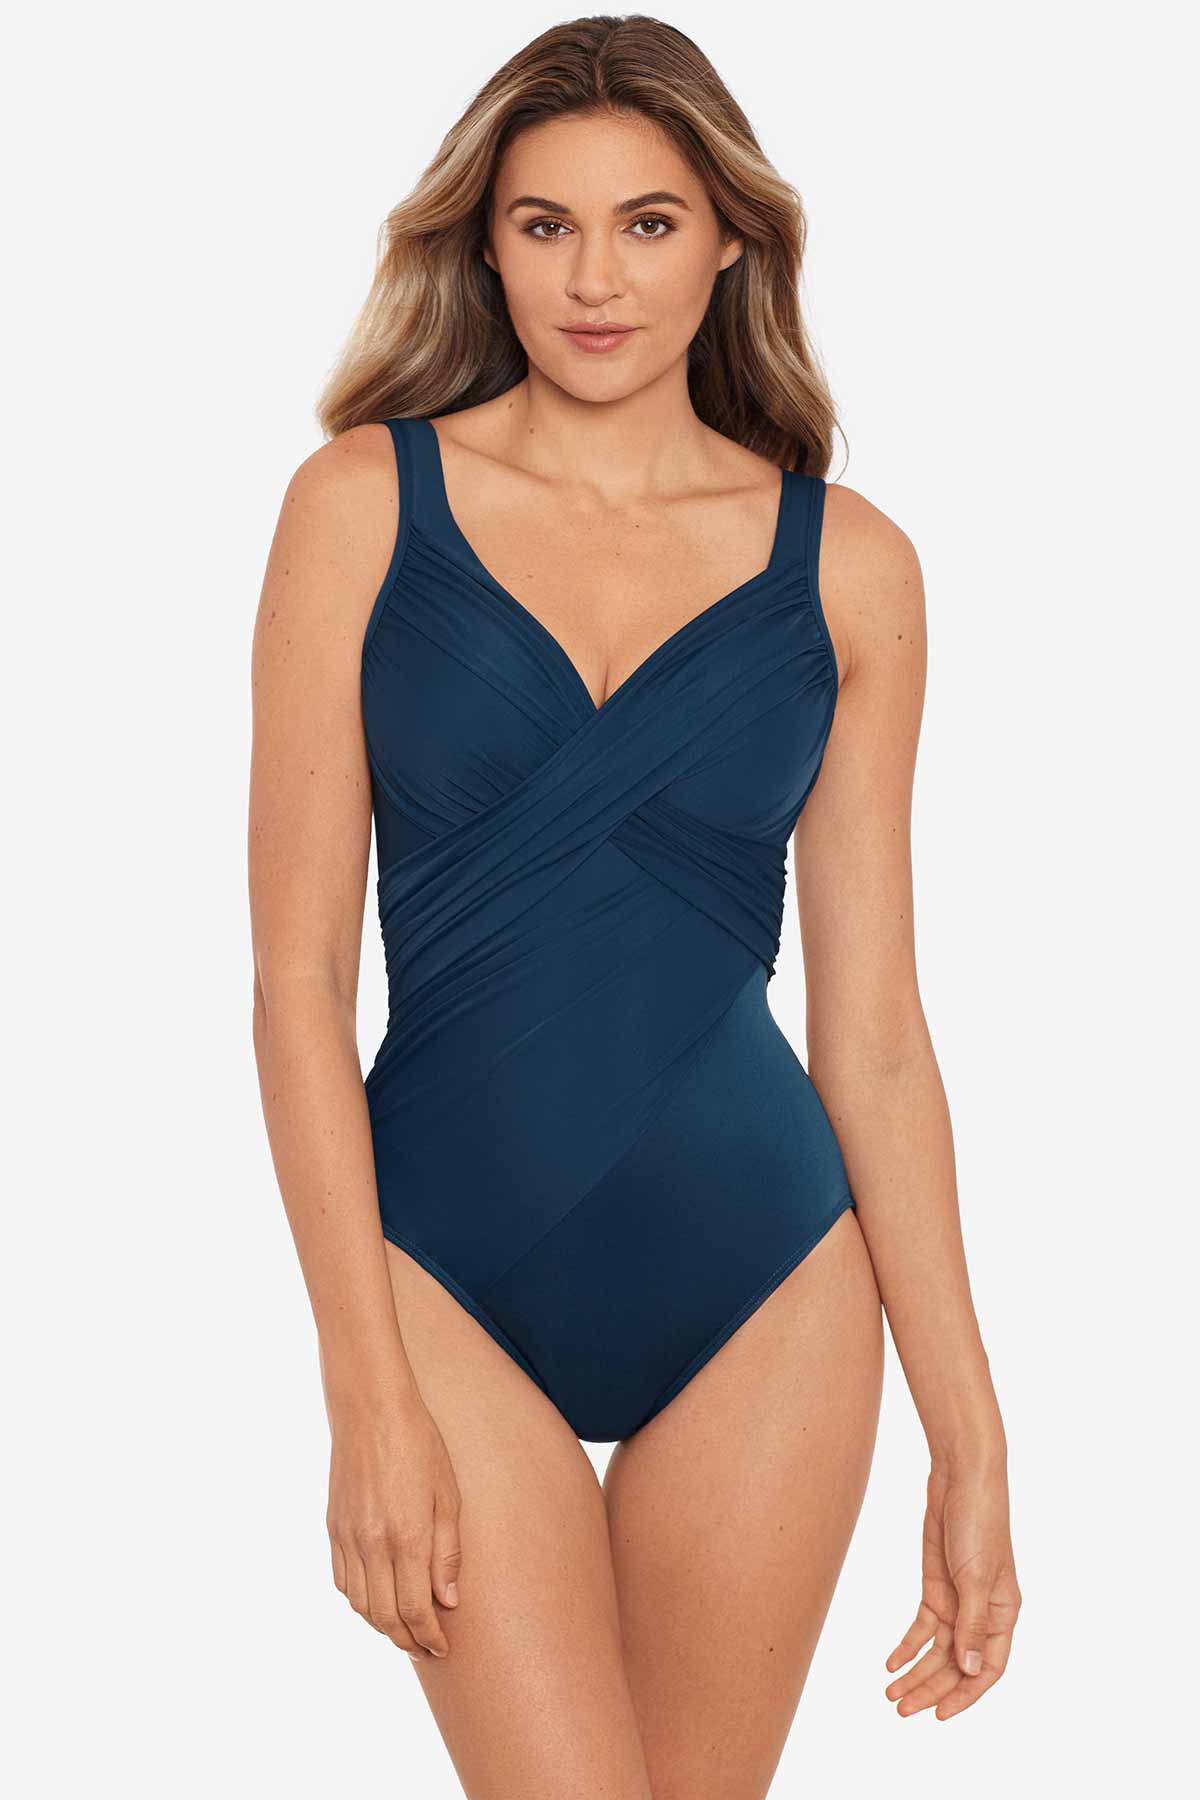 Lucky brand one piece with cut outs on side and chest